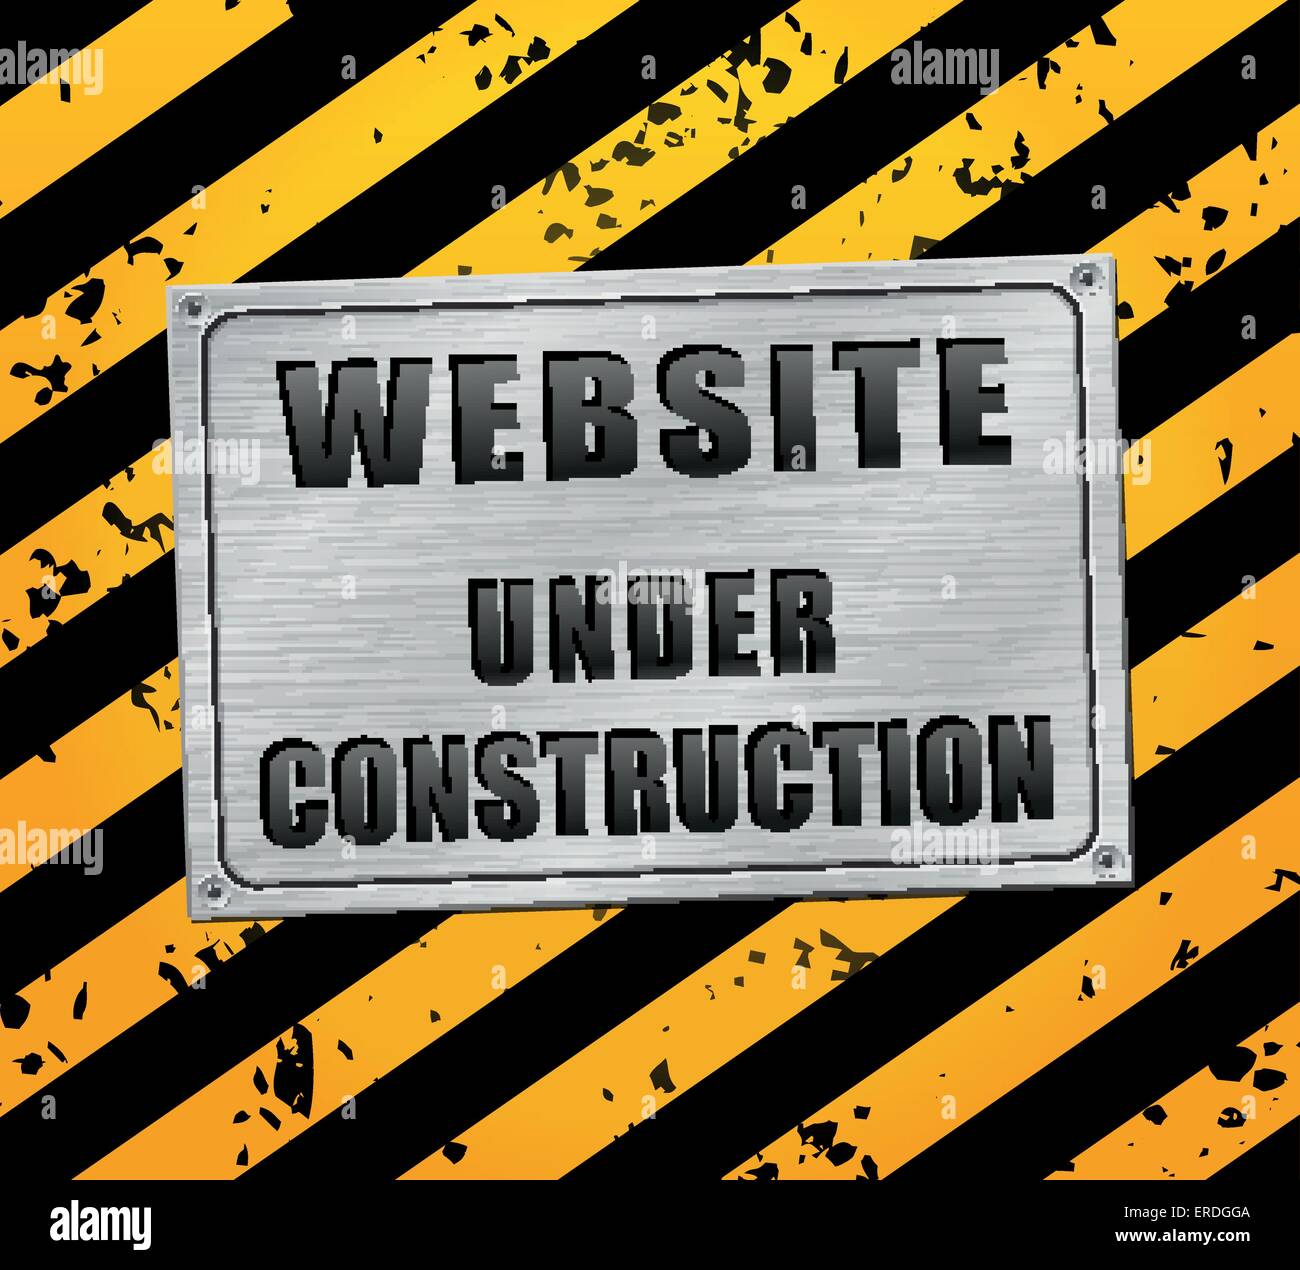 Vector illustration of web page under construction Stock Vector